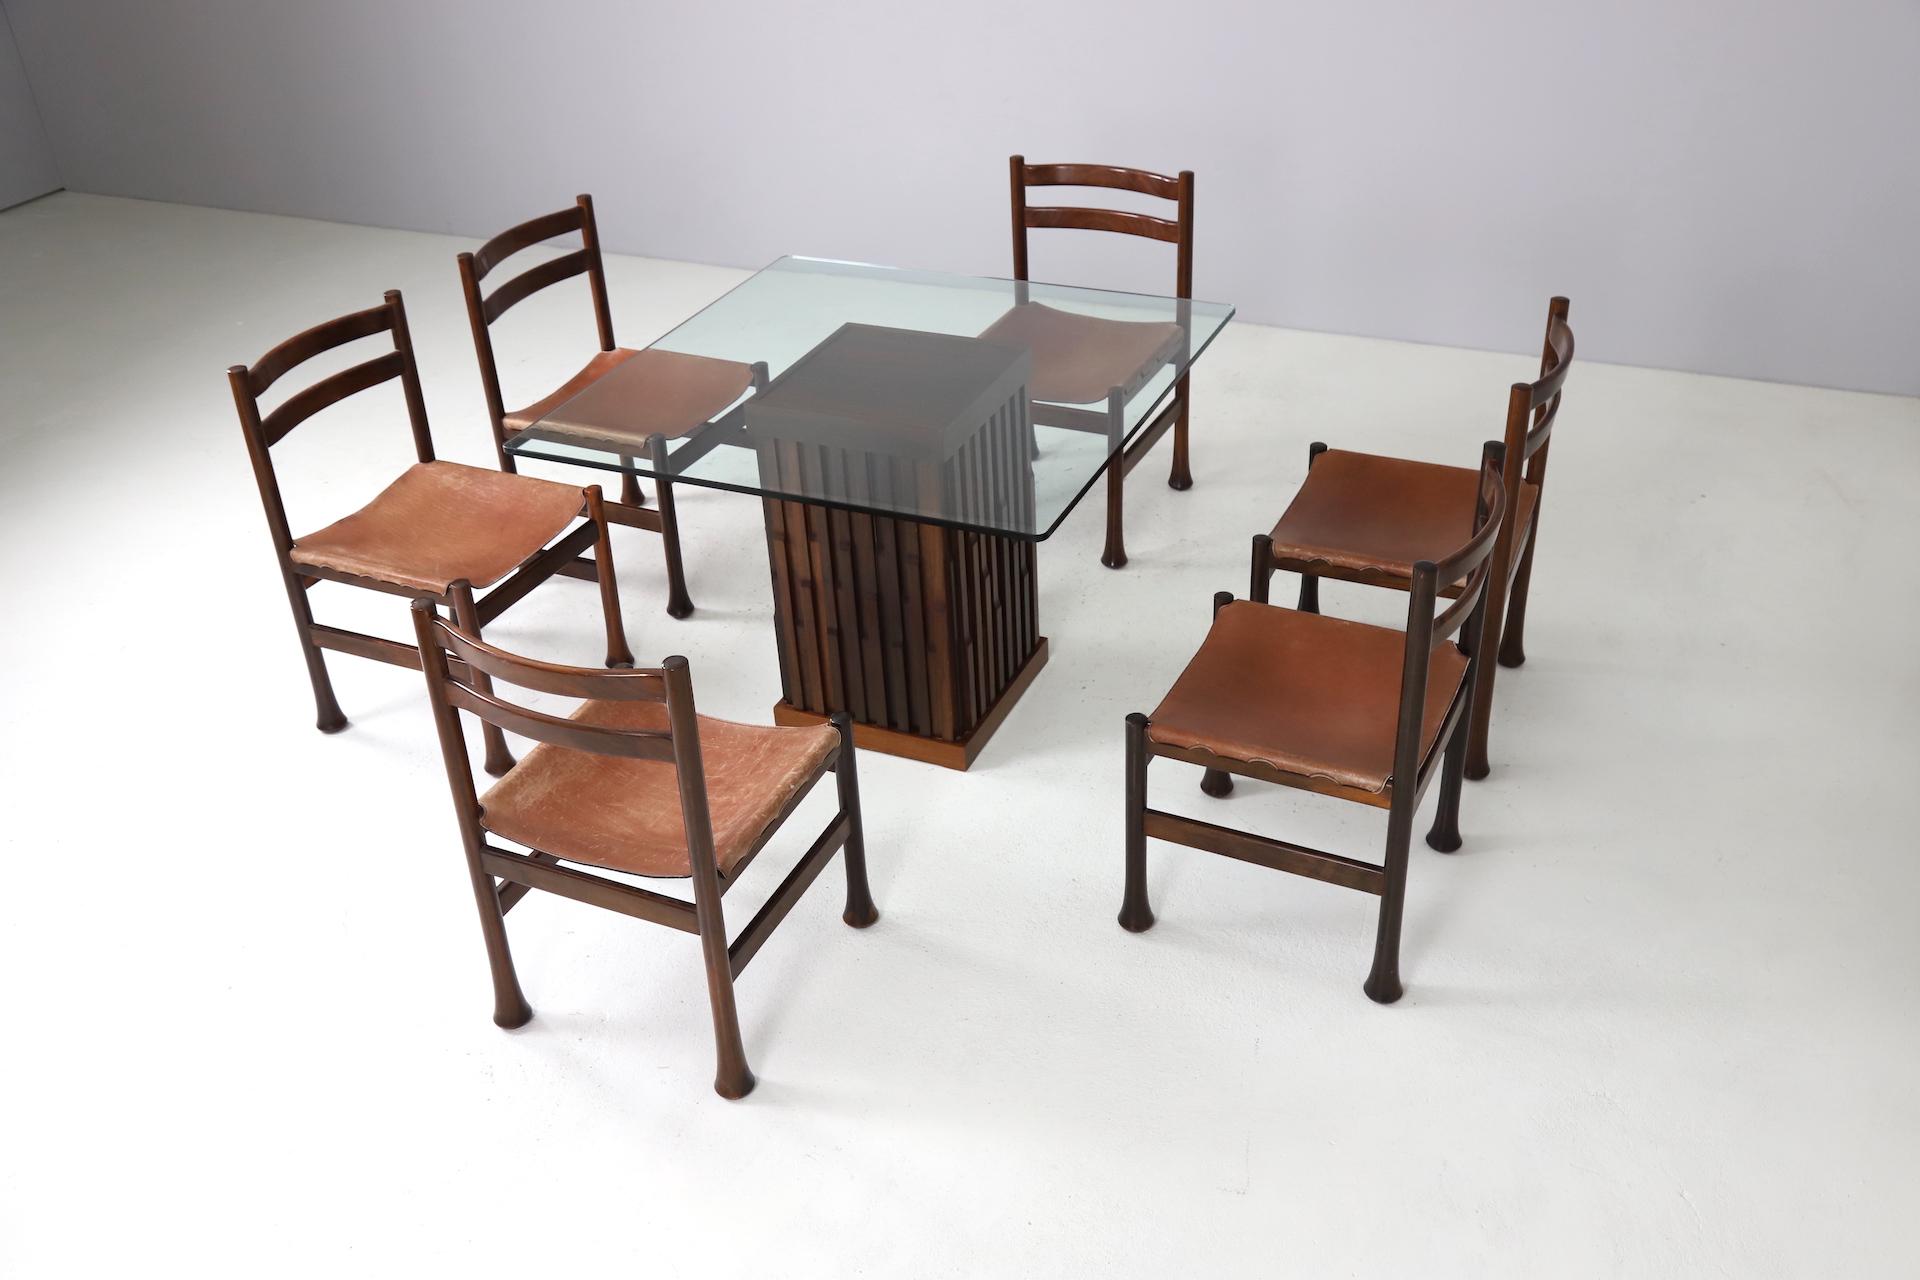 Sculptural dining room set designed by Luciano Frigerio. The chairs and table are made out of mahogany with a Brutalist look. The original saddle leather upholstery on the seats is without any defects and still very strong, over the years it